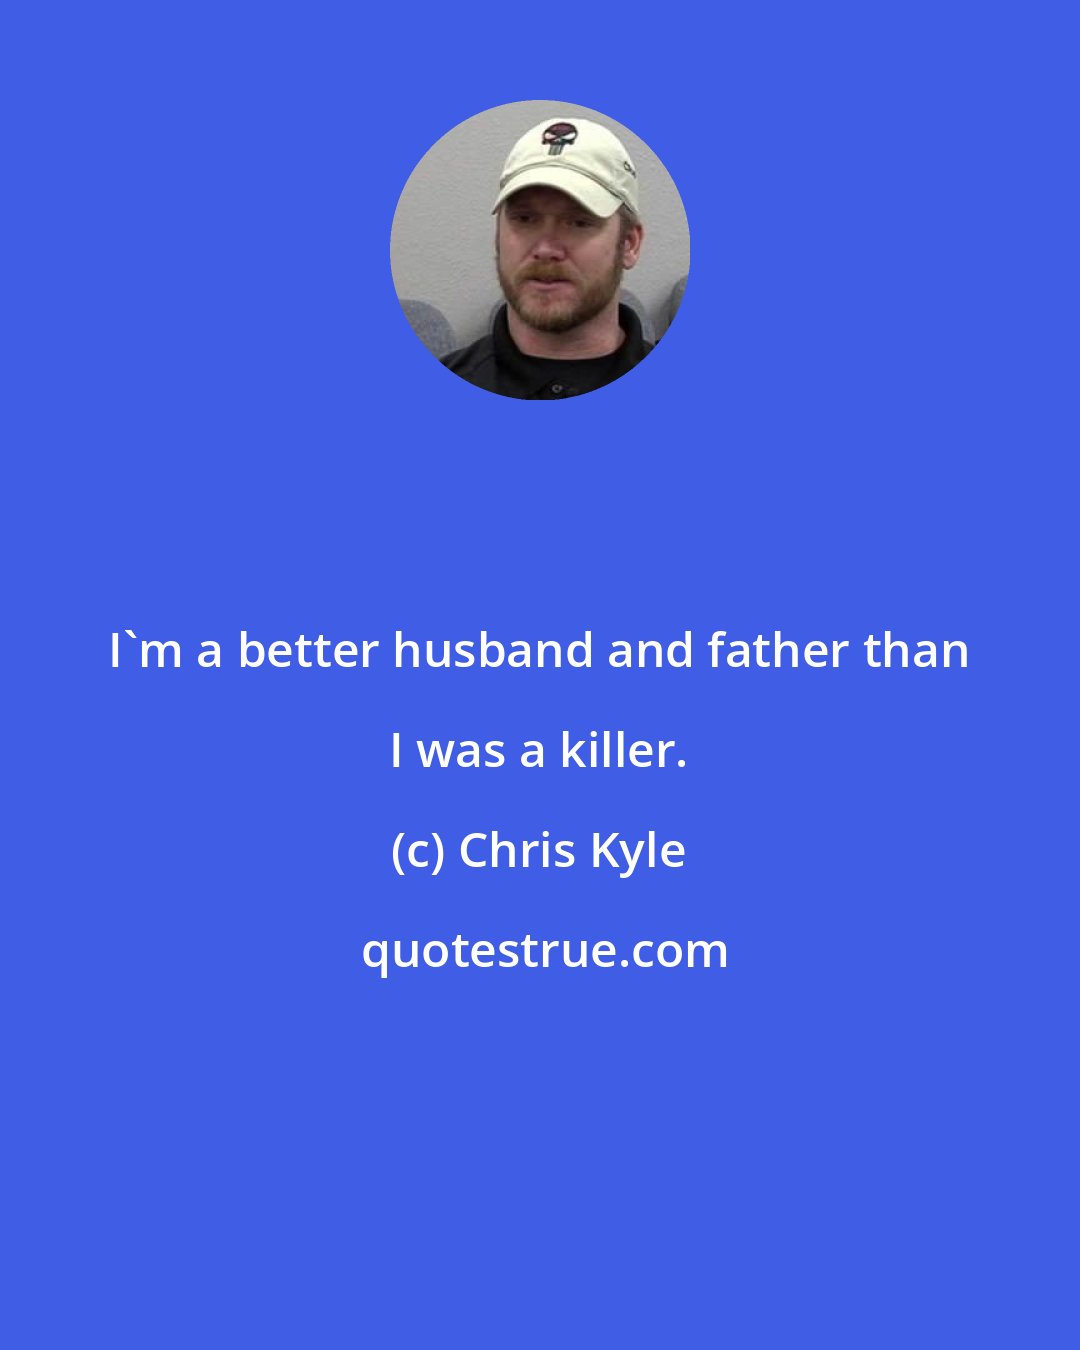 Chris Kyle: I'm a better husband and father than I was a killer.